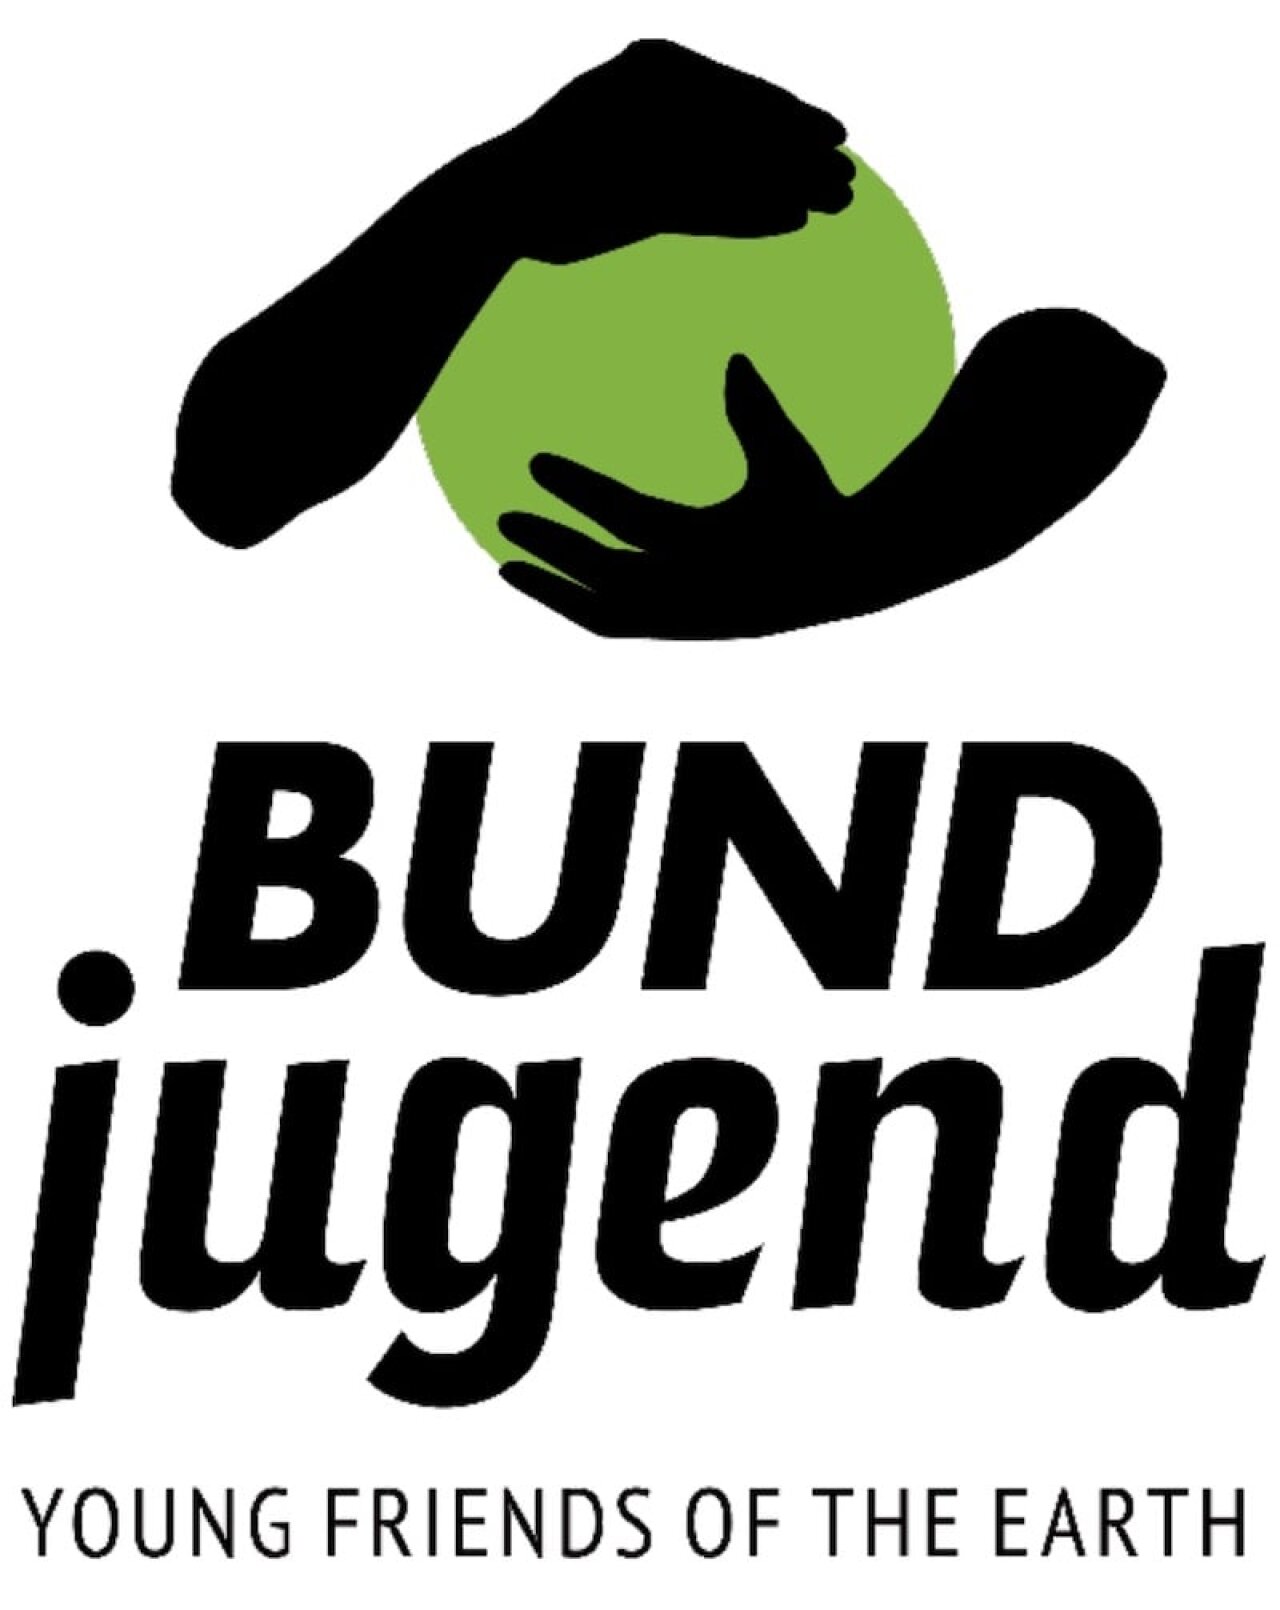 Bund Jugend – Young Friends Of The Earth.